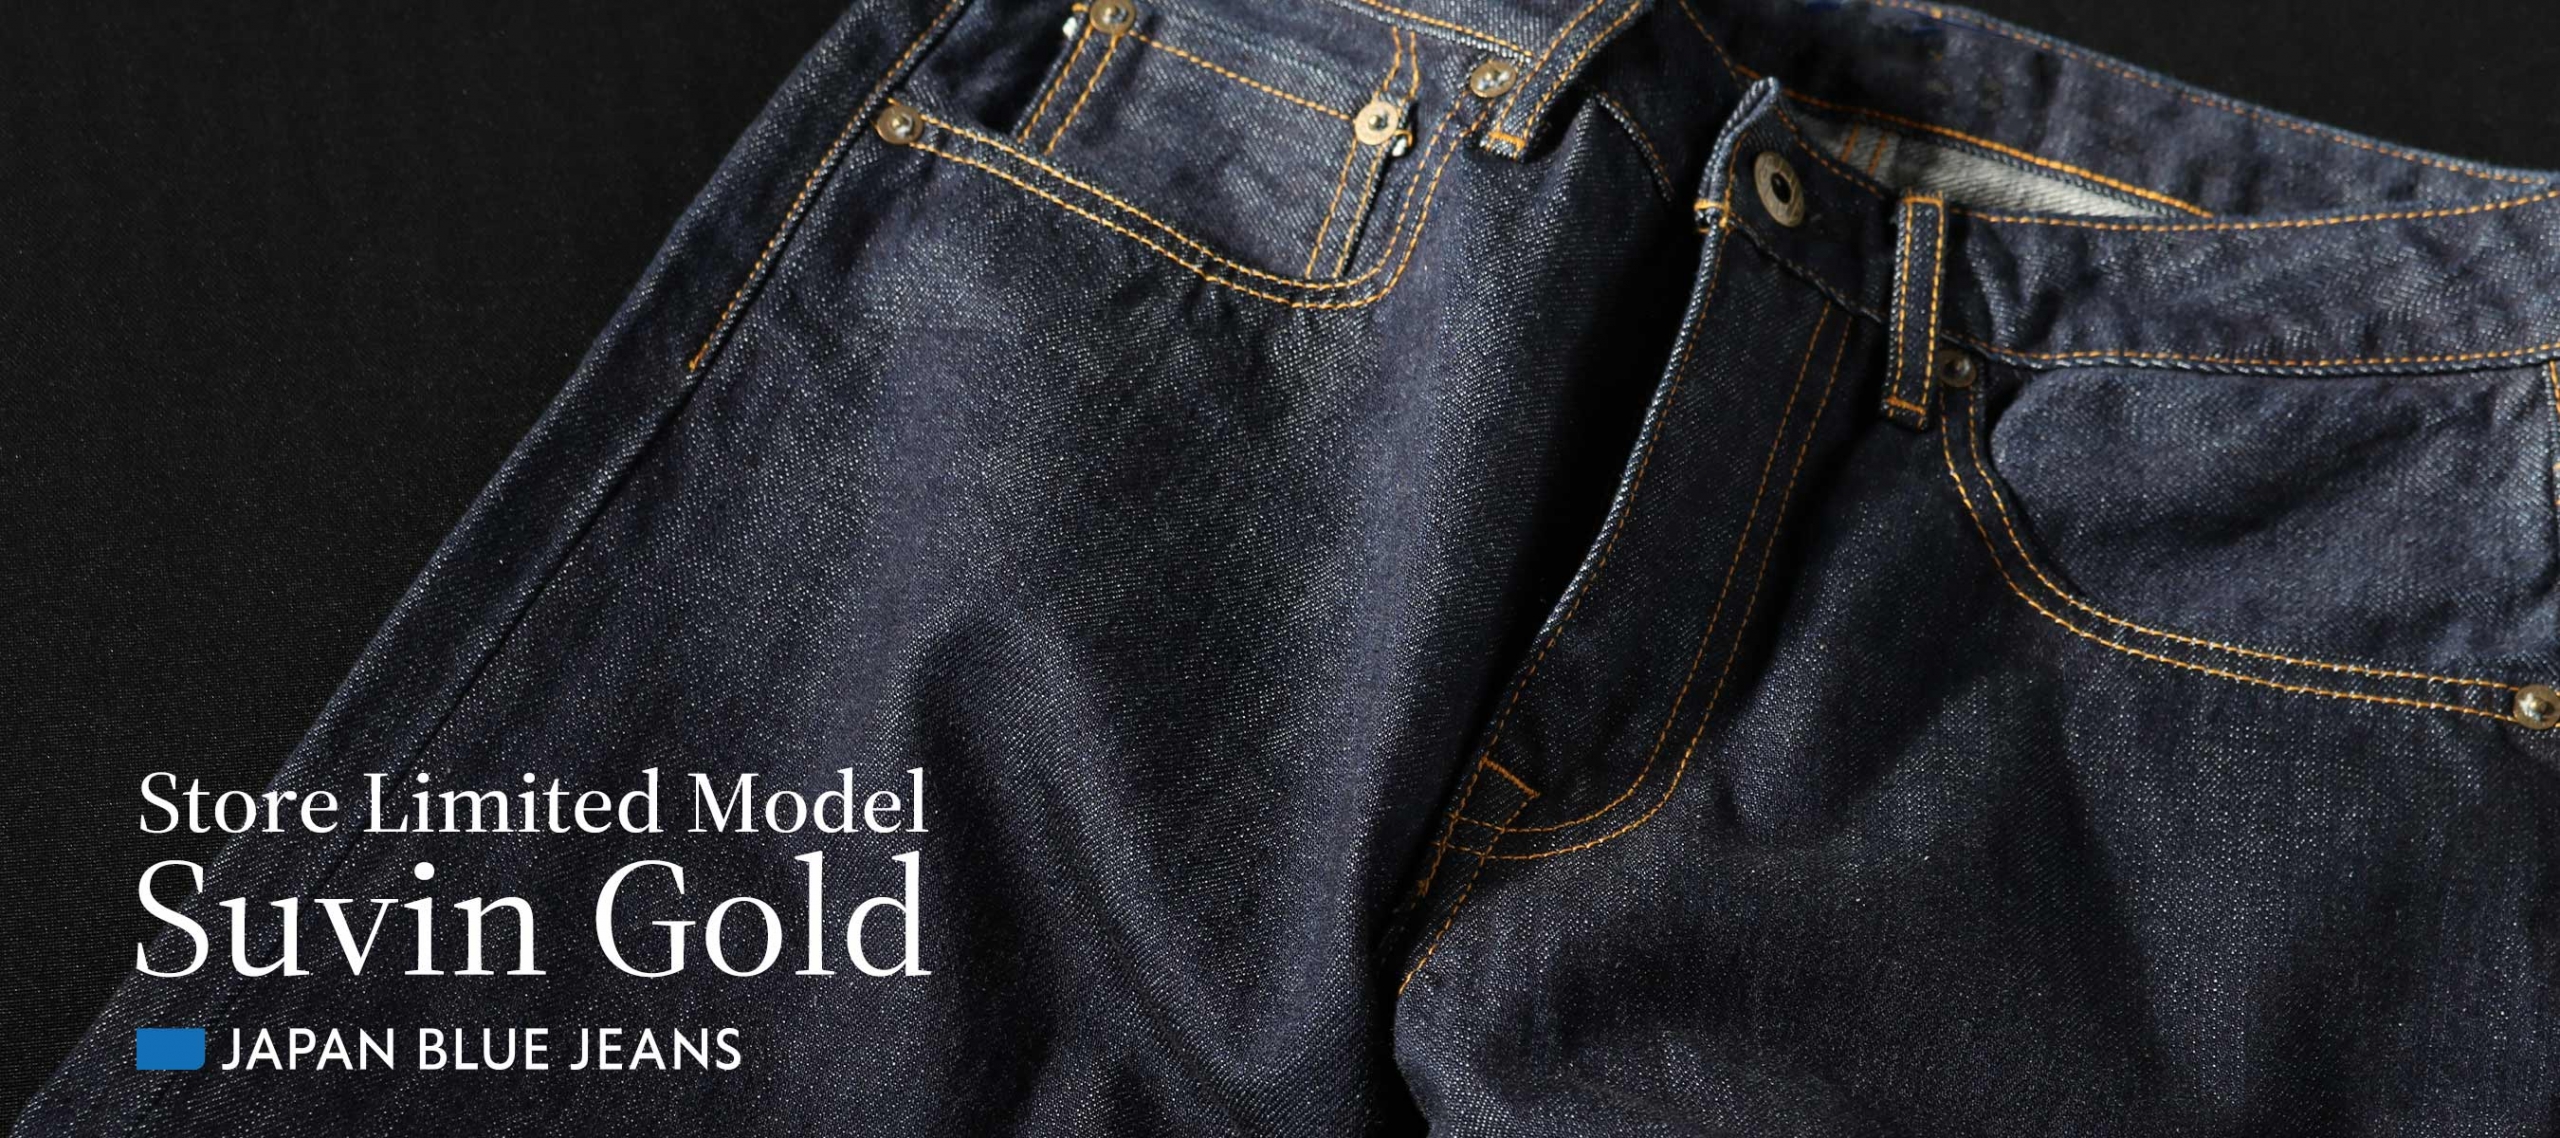 JAPAN BLUE JEANS Store Limited Model Suvin Gold